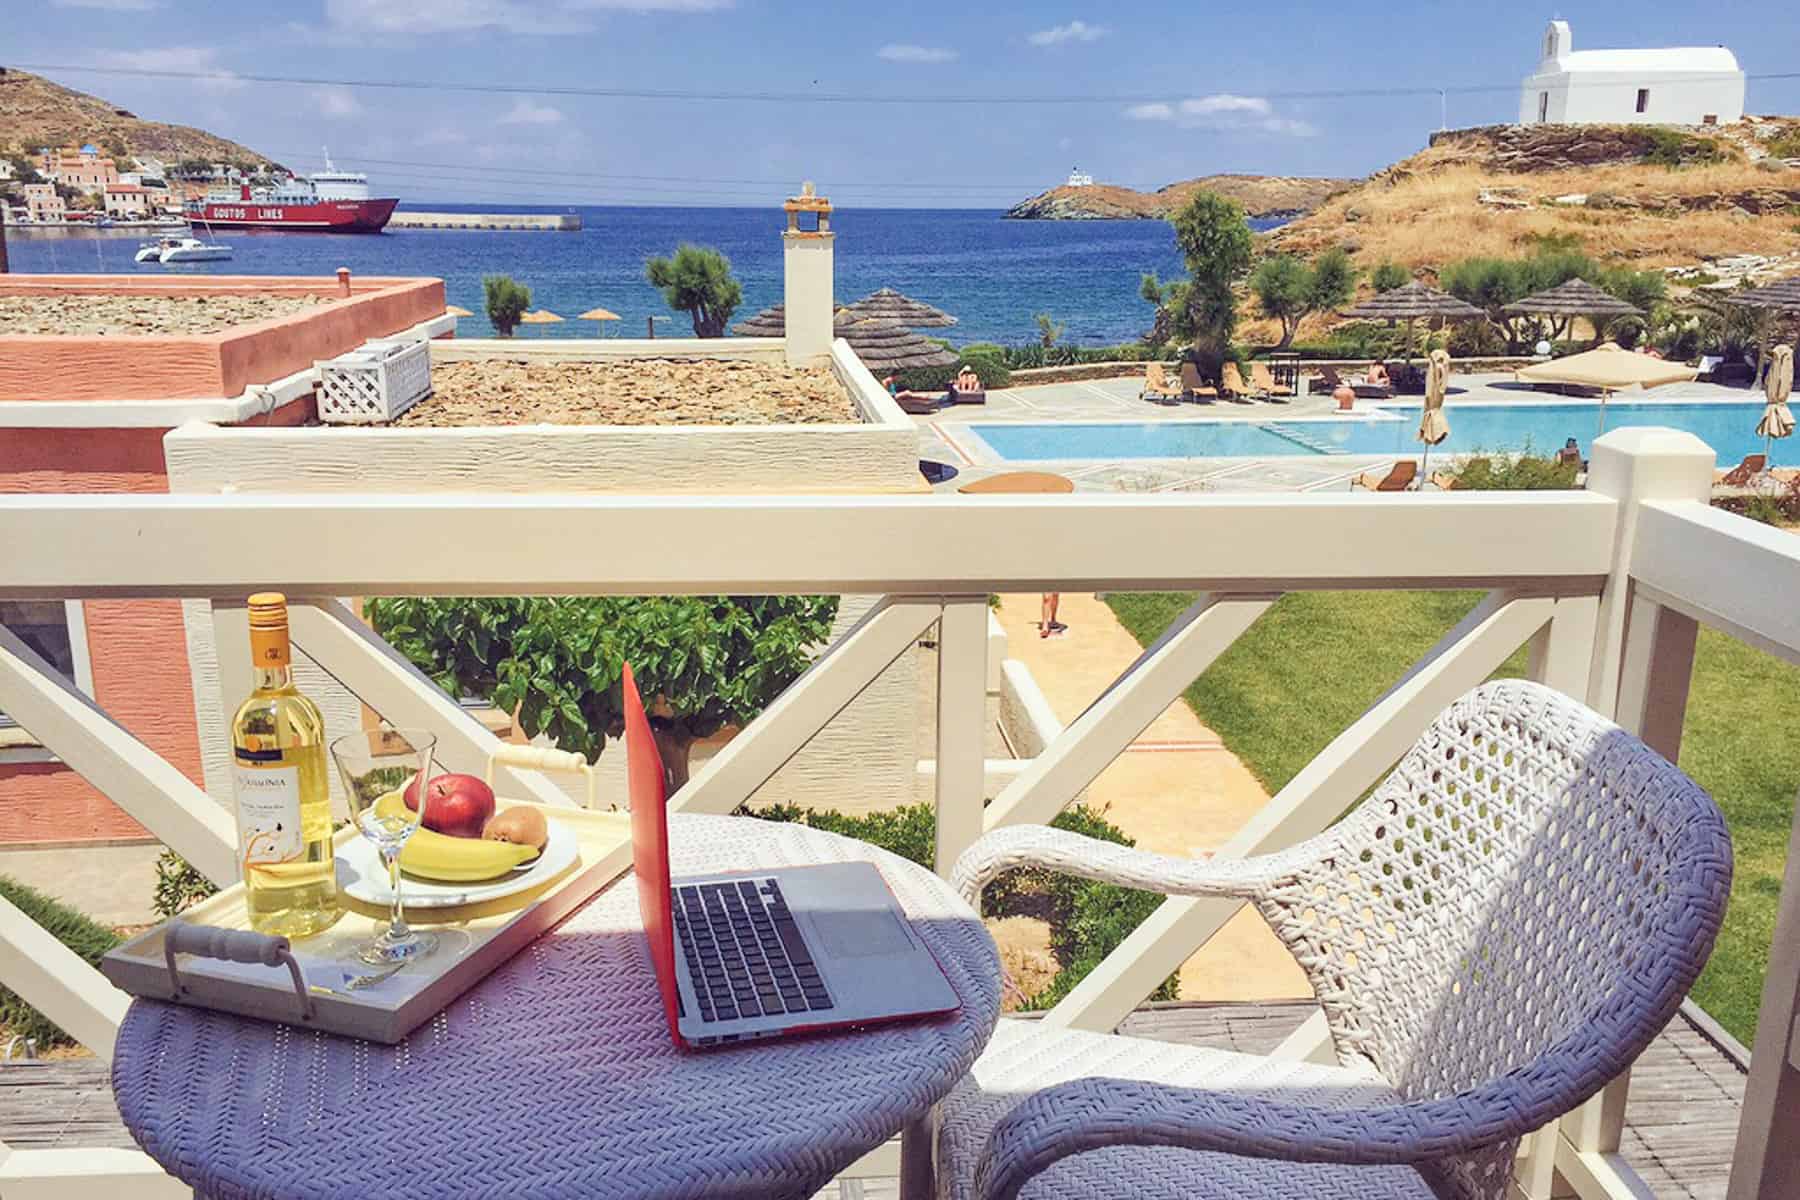 A hotel balcony view to the pool at Porto Kea Suites on Kea Island Greece. On the table is a red laptop and a bottle of white wine